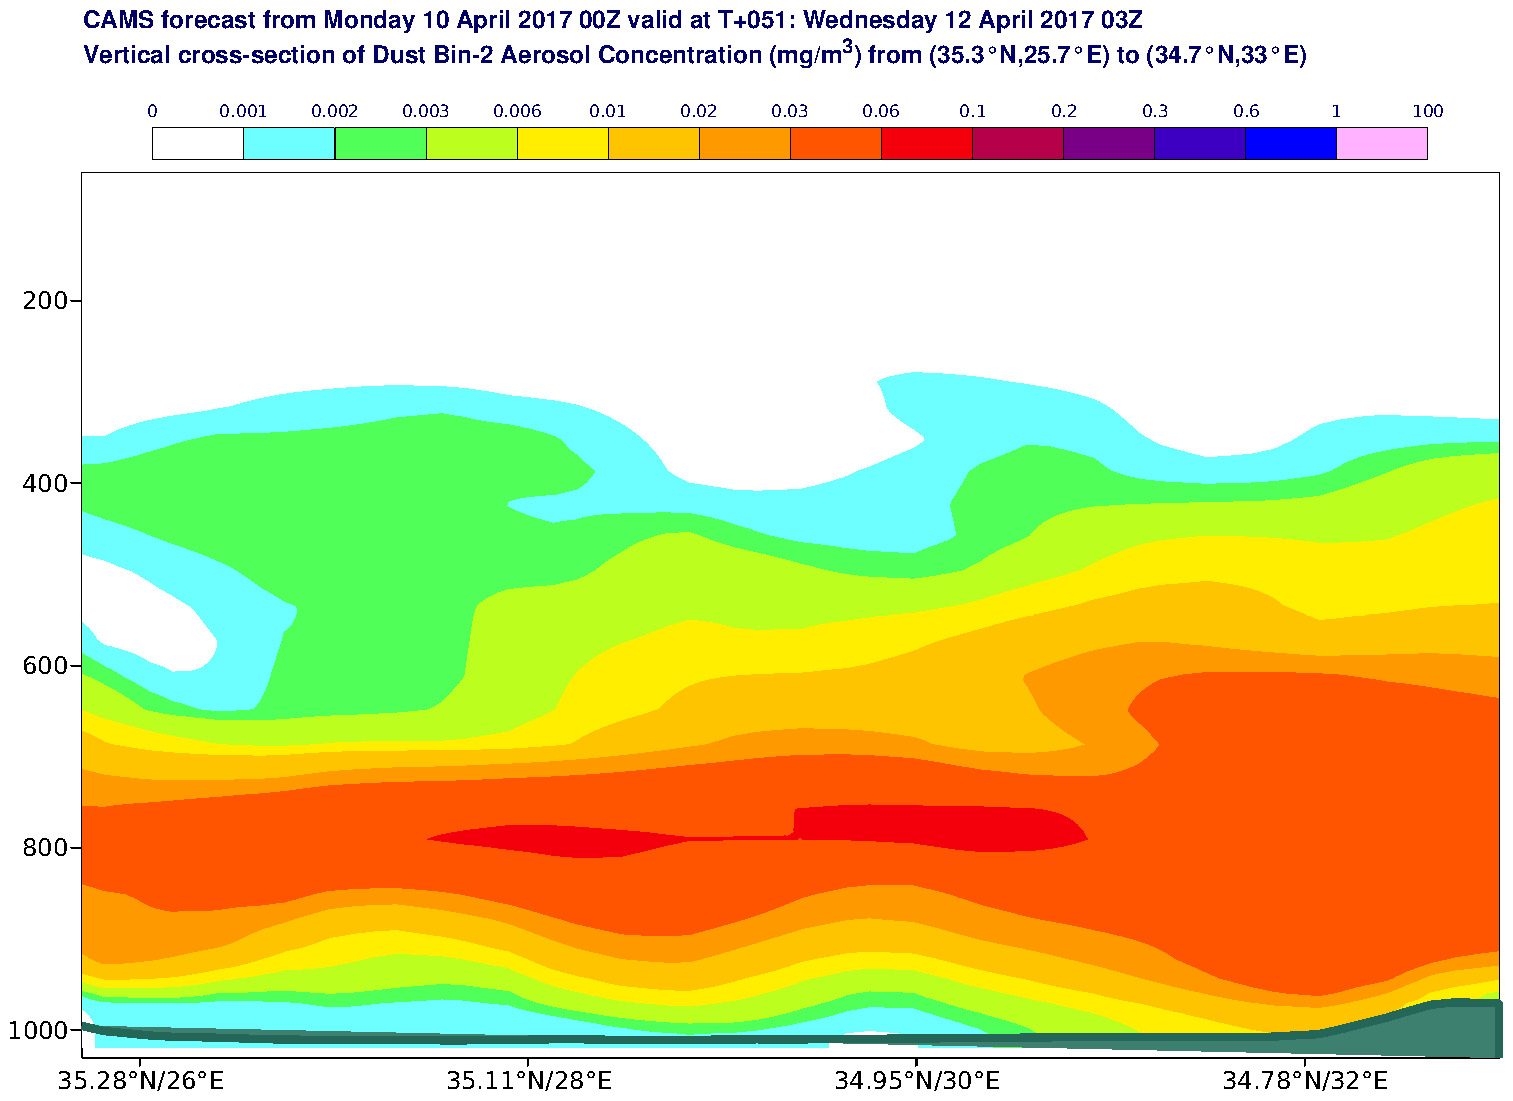 Vertical cross-section of Dust Bin-2 Aerosol Concentration (mg/m3) valid at T51 - 2017-04-12 03:00